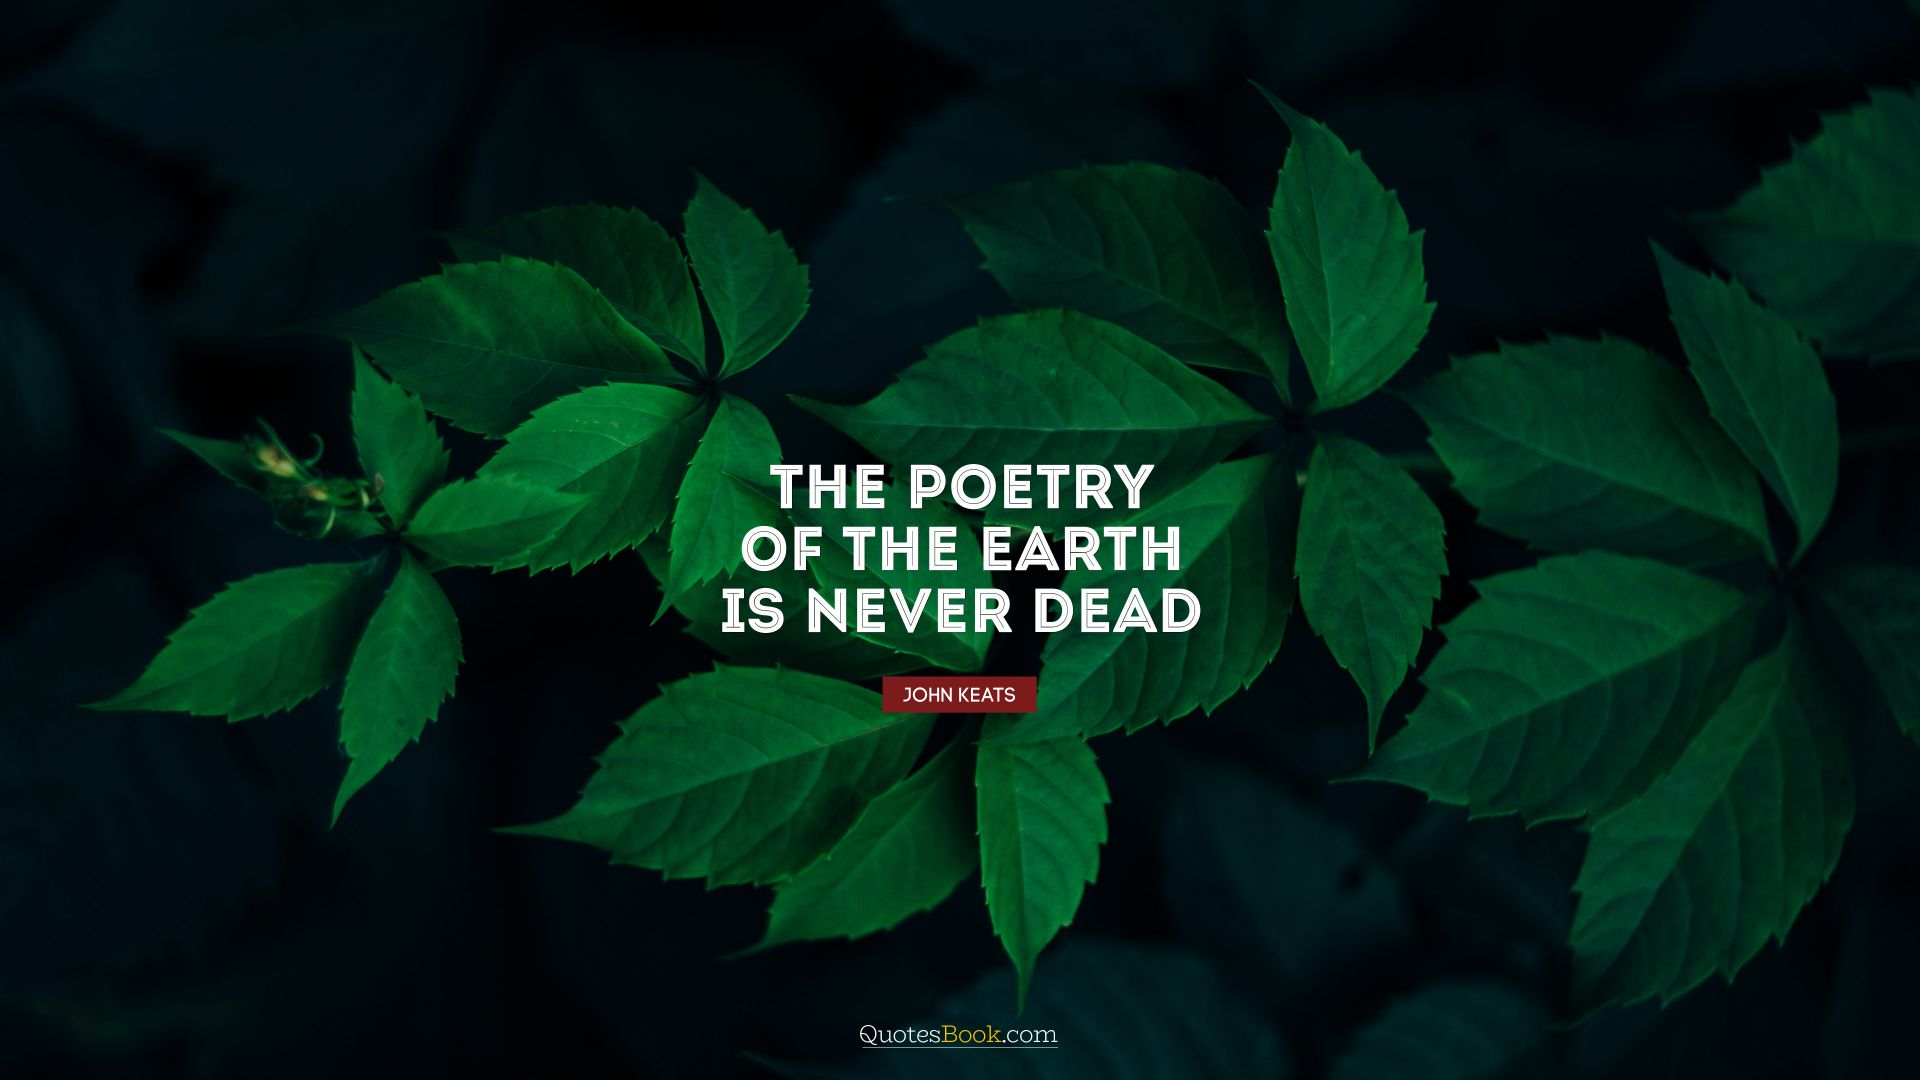 The poetry of the earth is never dead. - Quote by John Keats